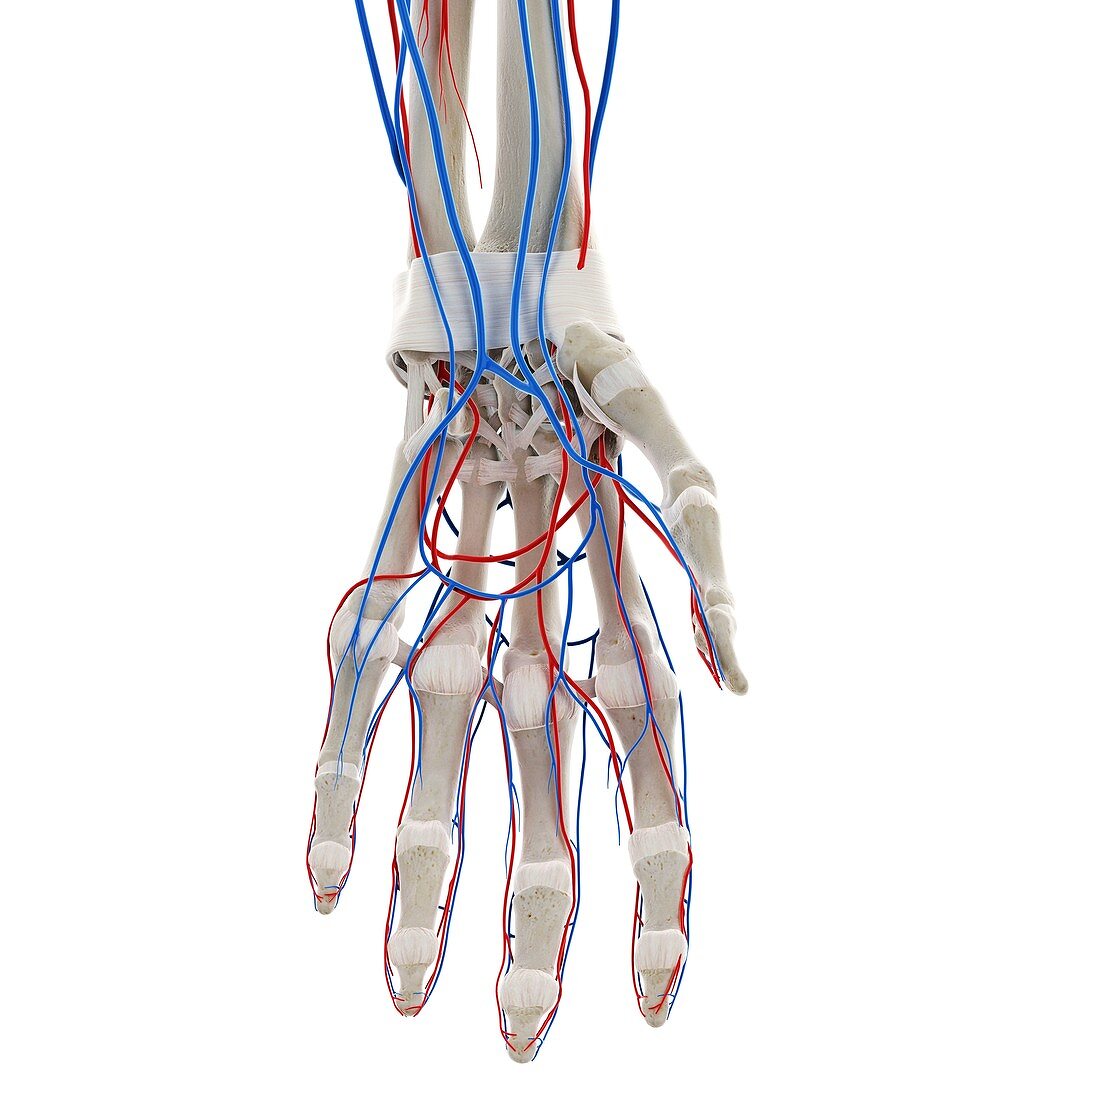 Blood vessels of the hand, illustration